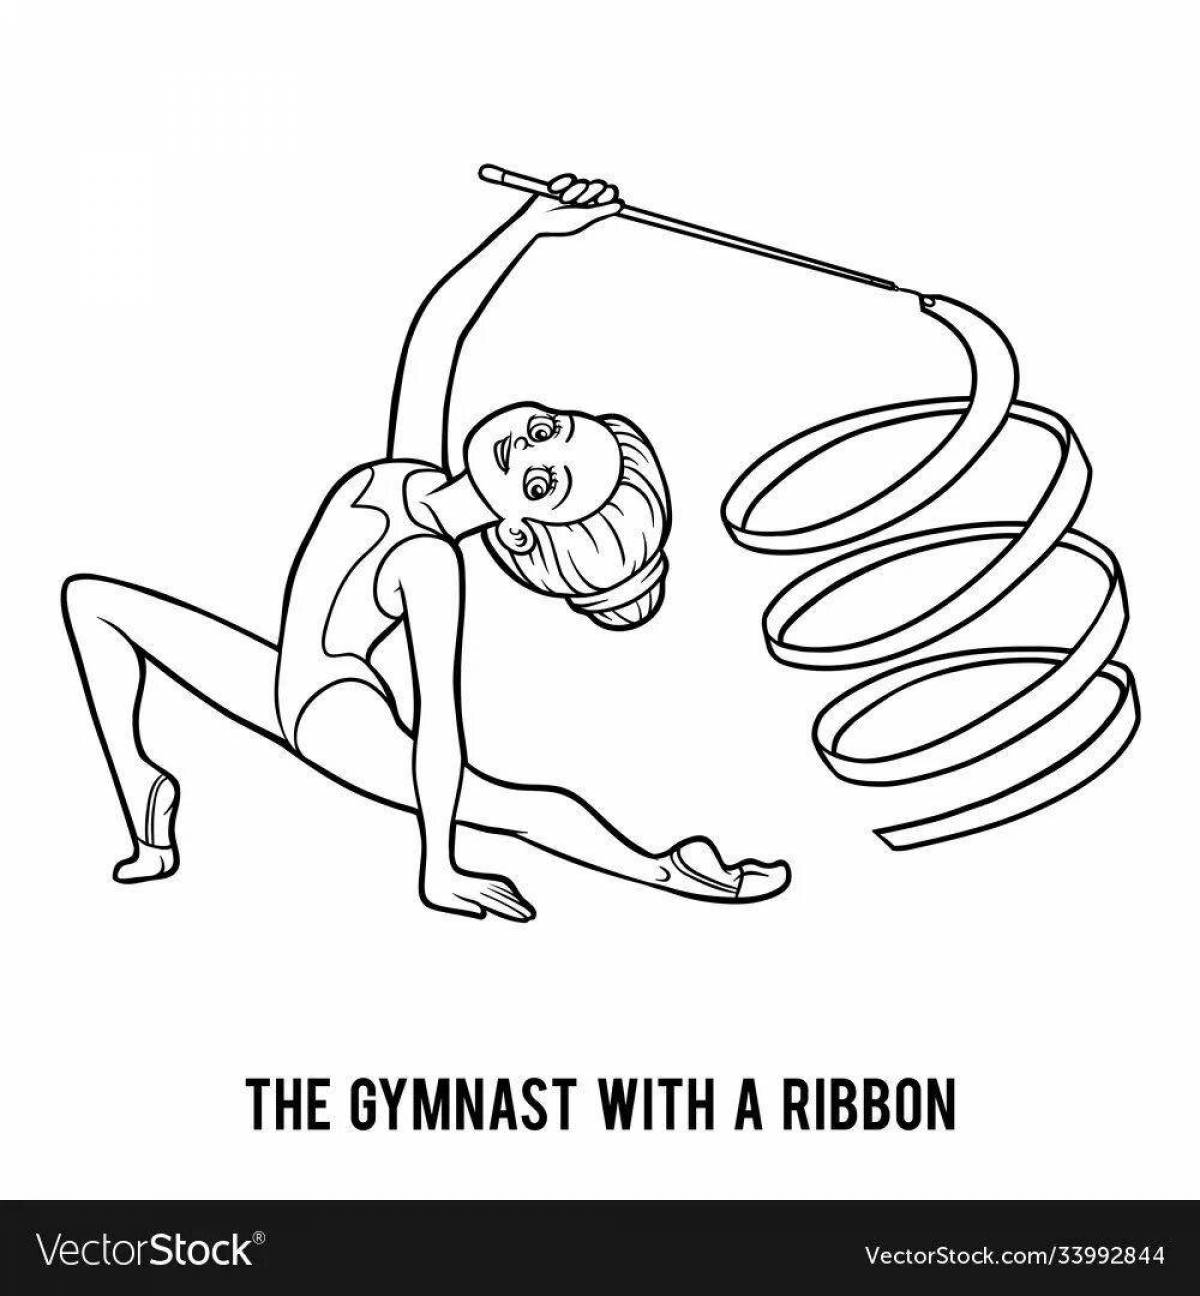 Dynamic gymnast coloring page